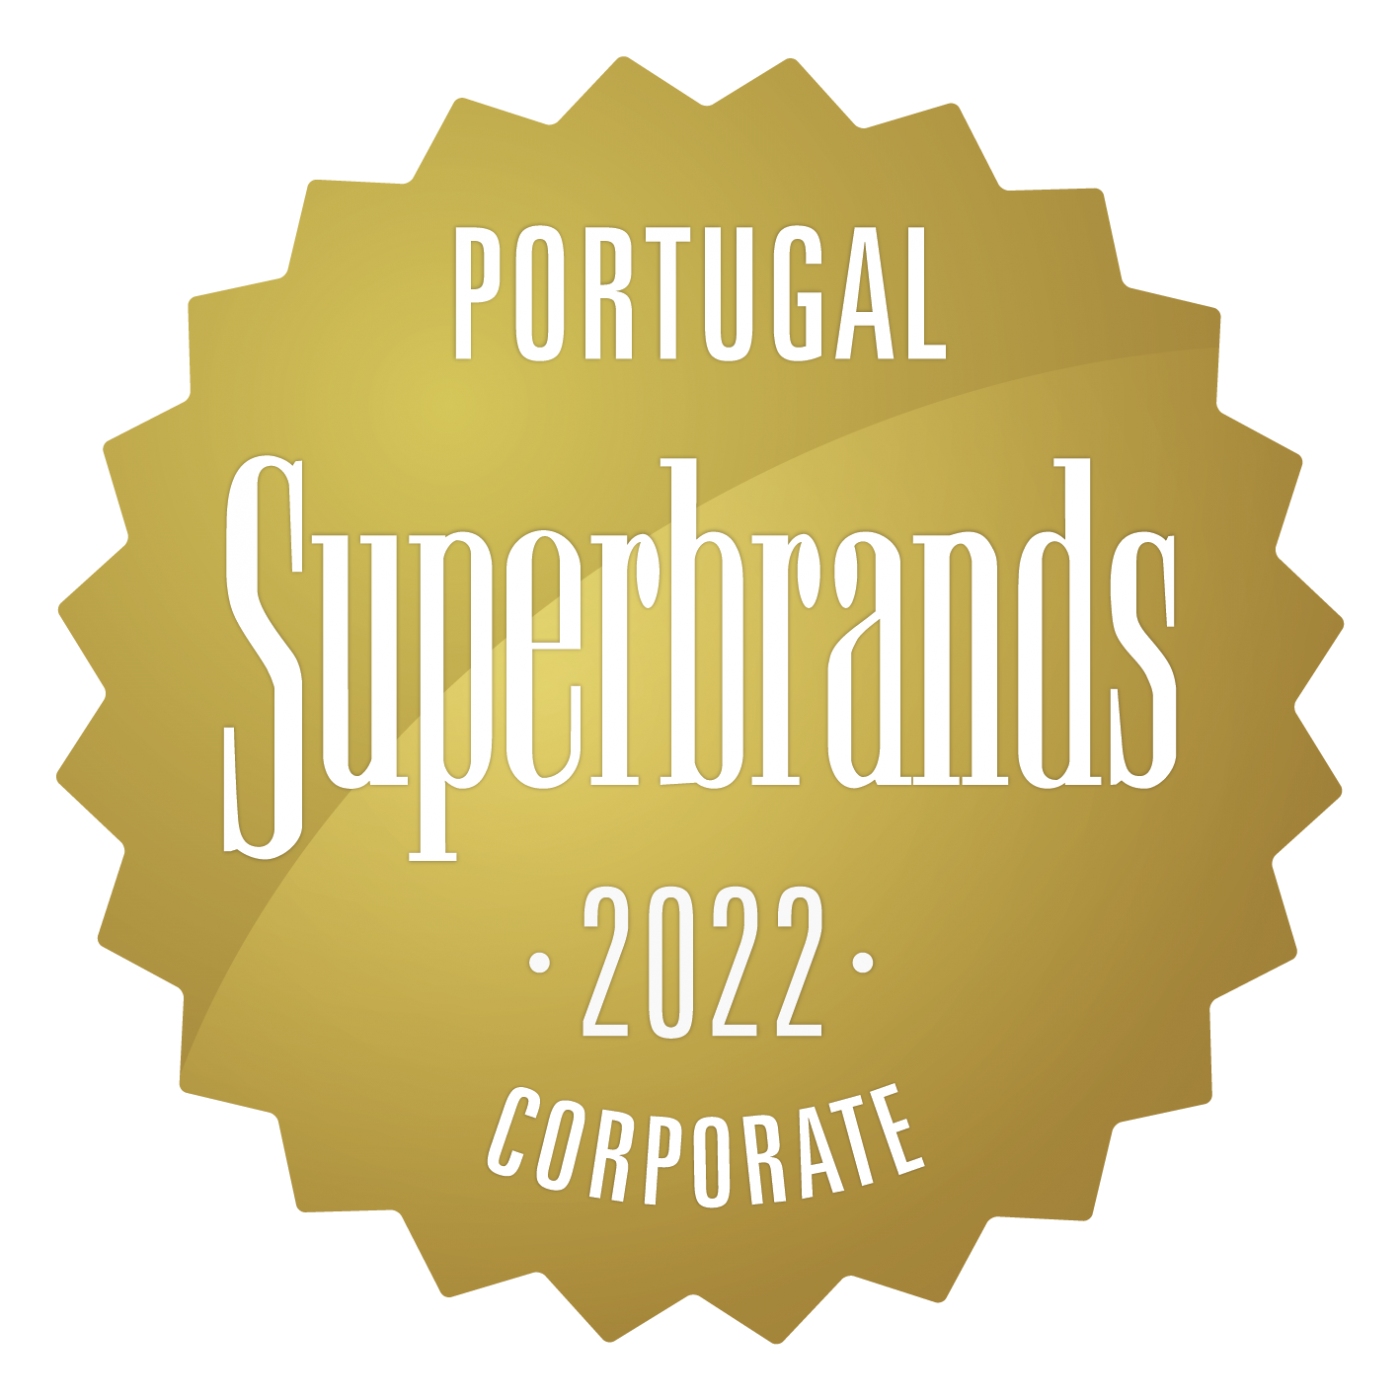 APCER IS AGAIN SUPERBRAND CORPORATE 2022!